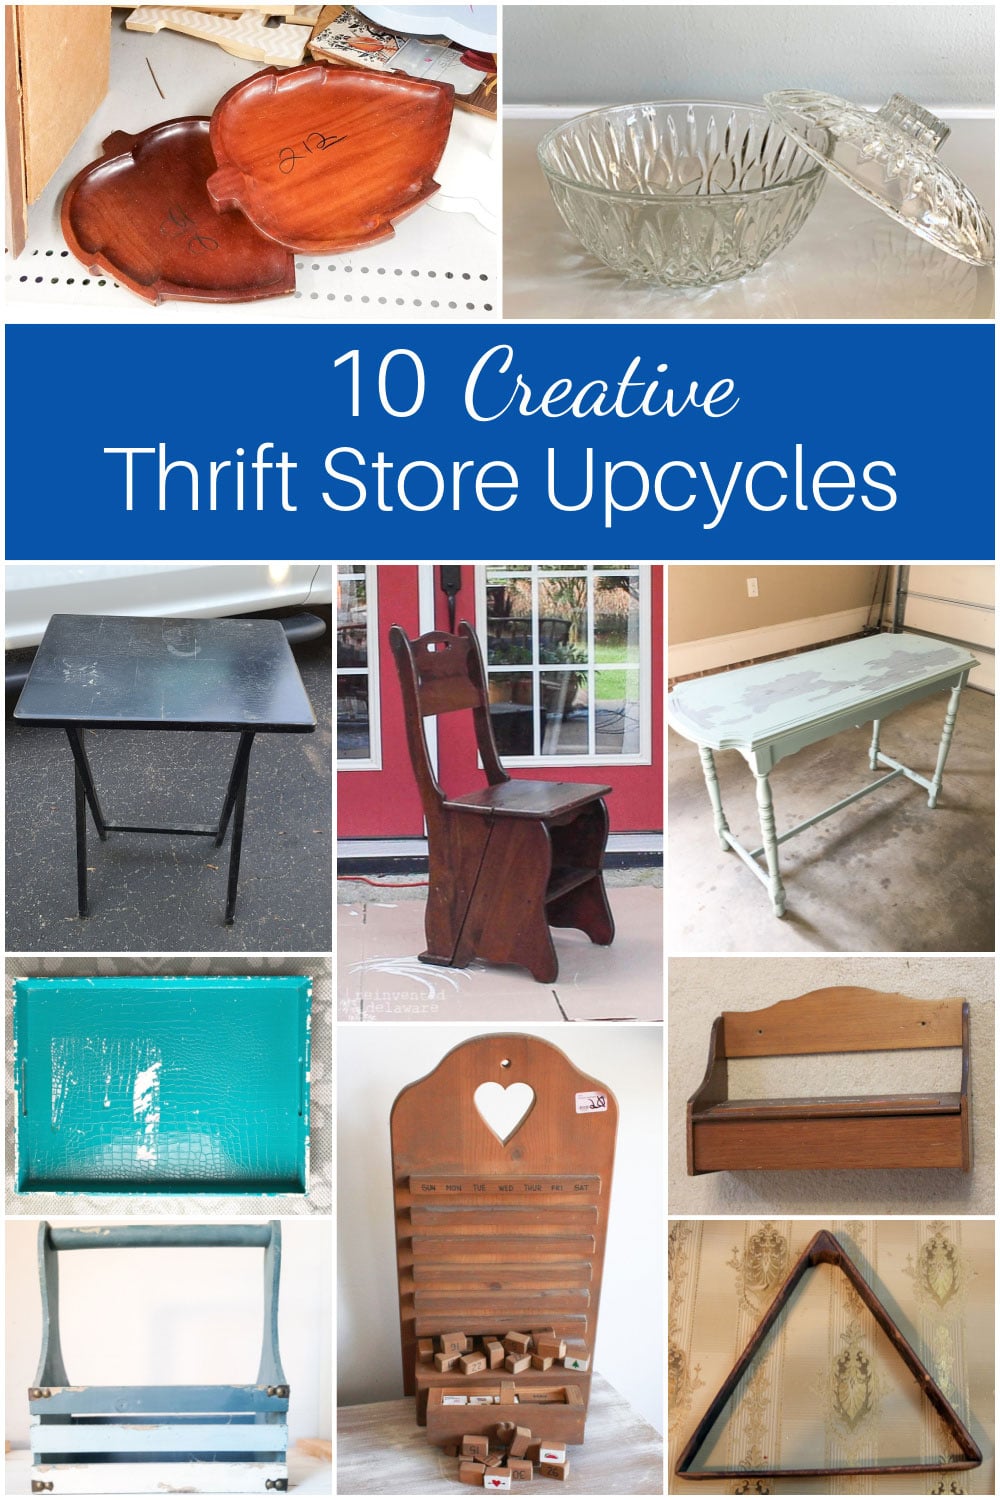 Thrift store repurposes using items commonly found at thrift stores.